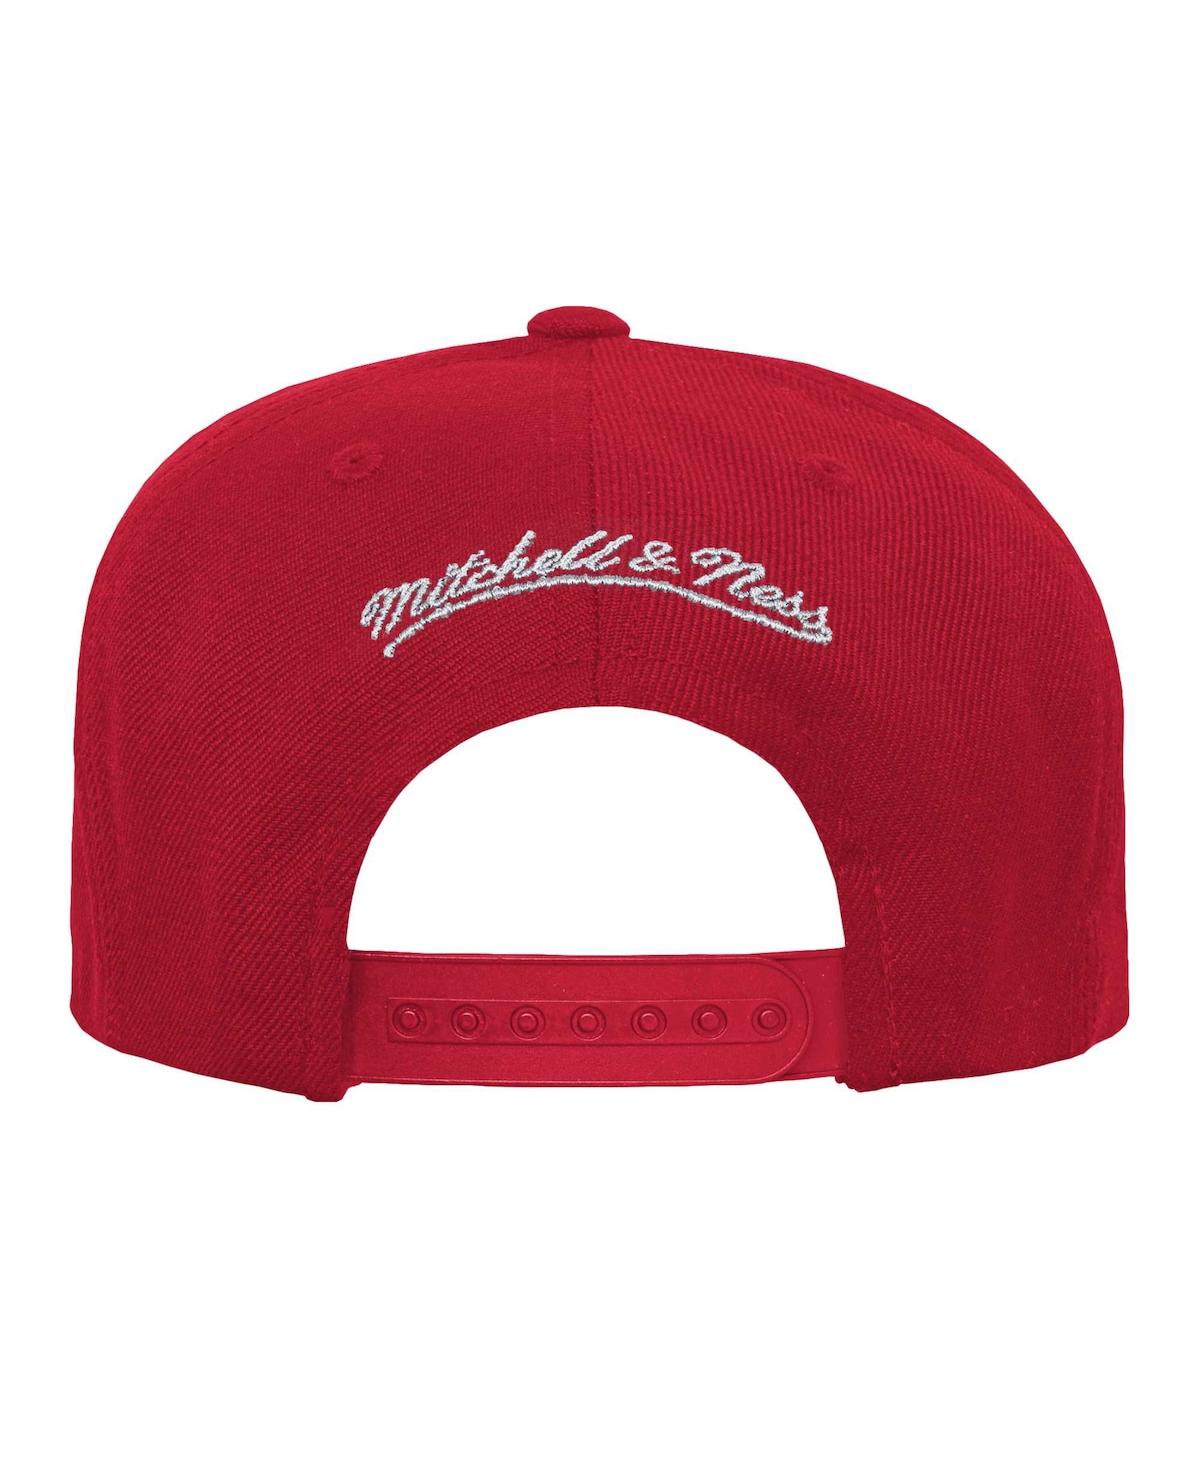 Shop Mitchell & Ness Youth Boys And Girls  Red Tampa Bay Buccaneers Champ Stack Flat Brim Snapback Hat